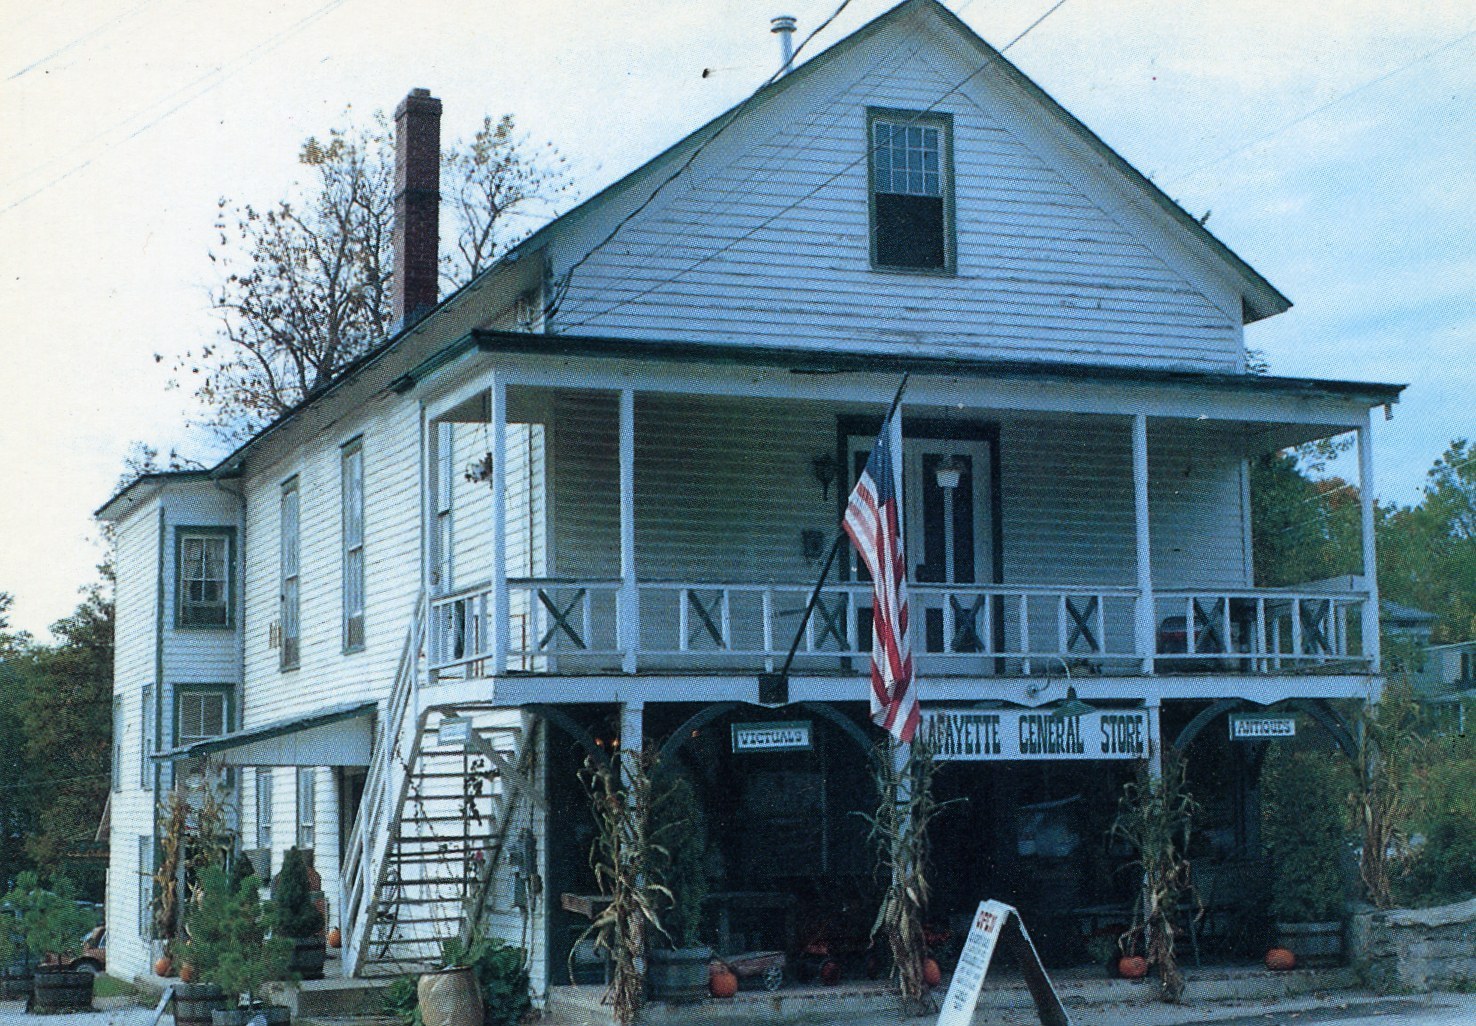 Lafayette - The general store